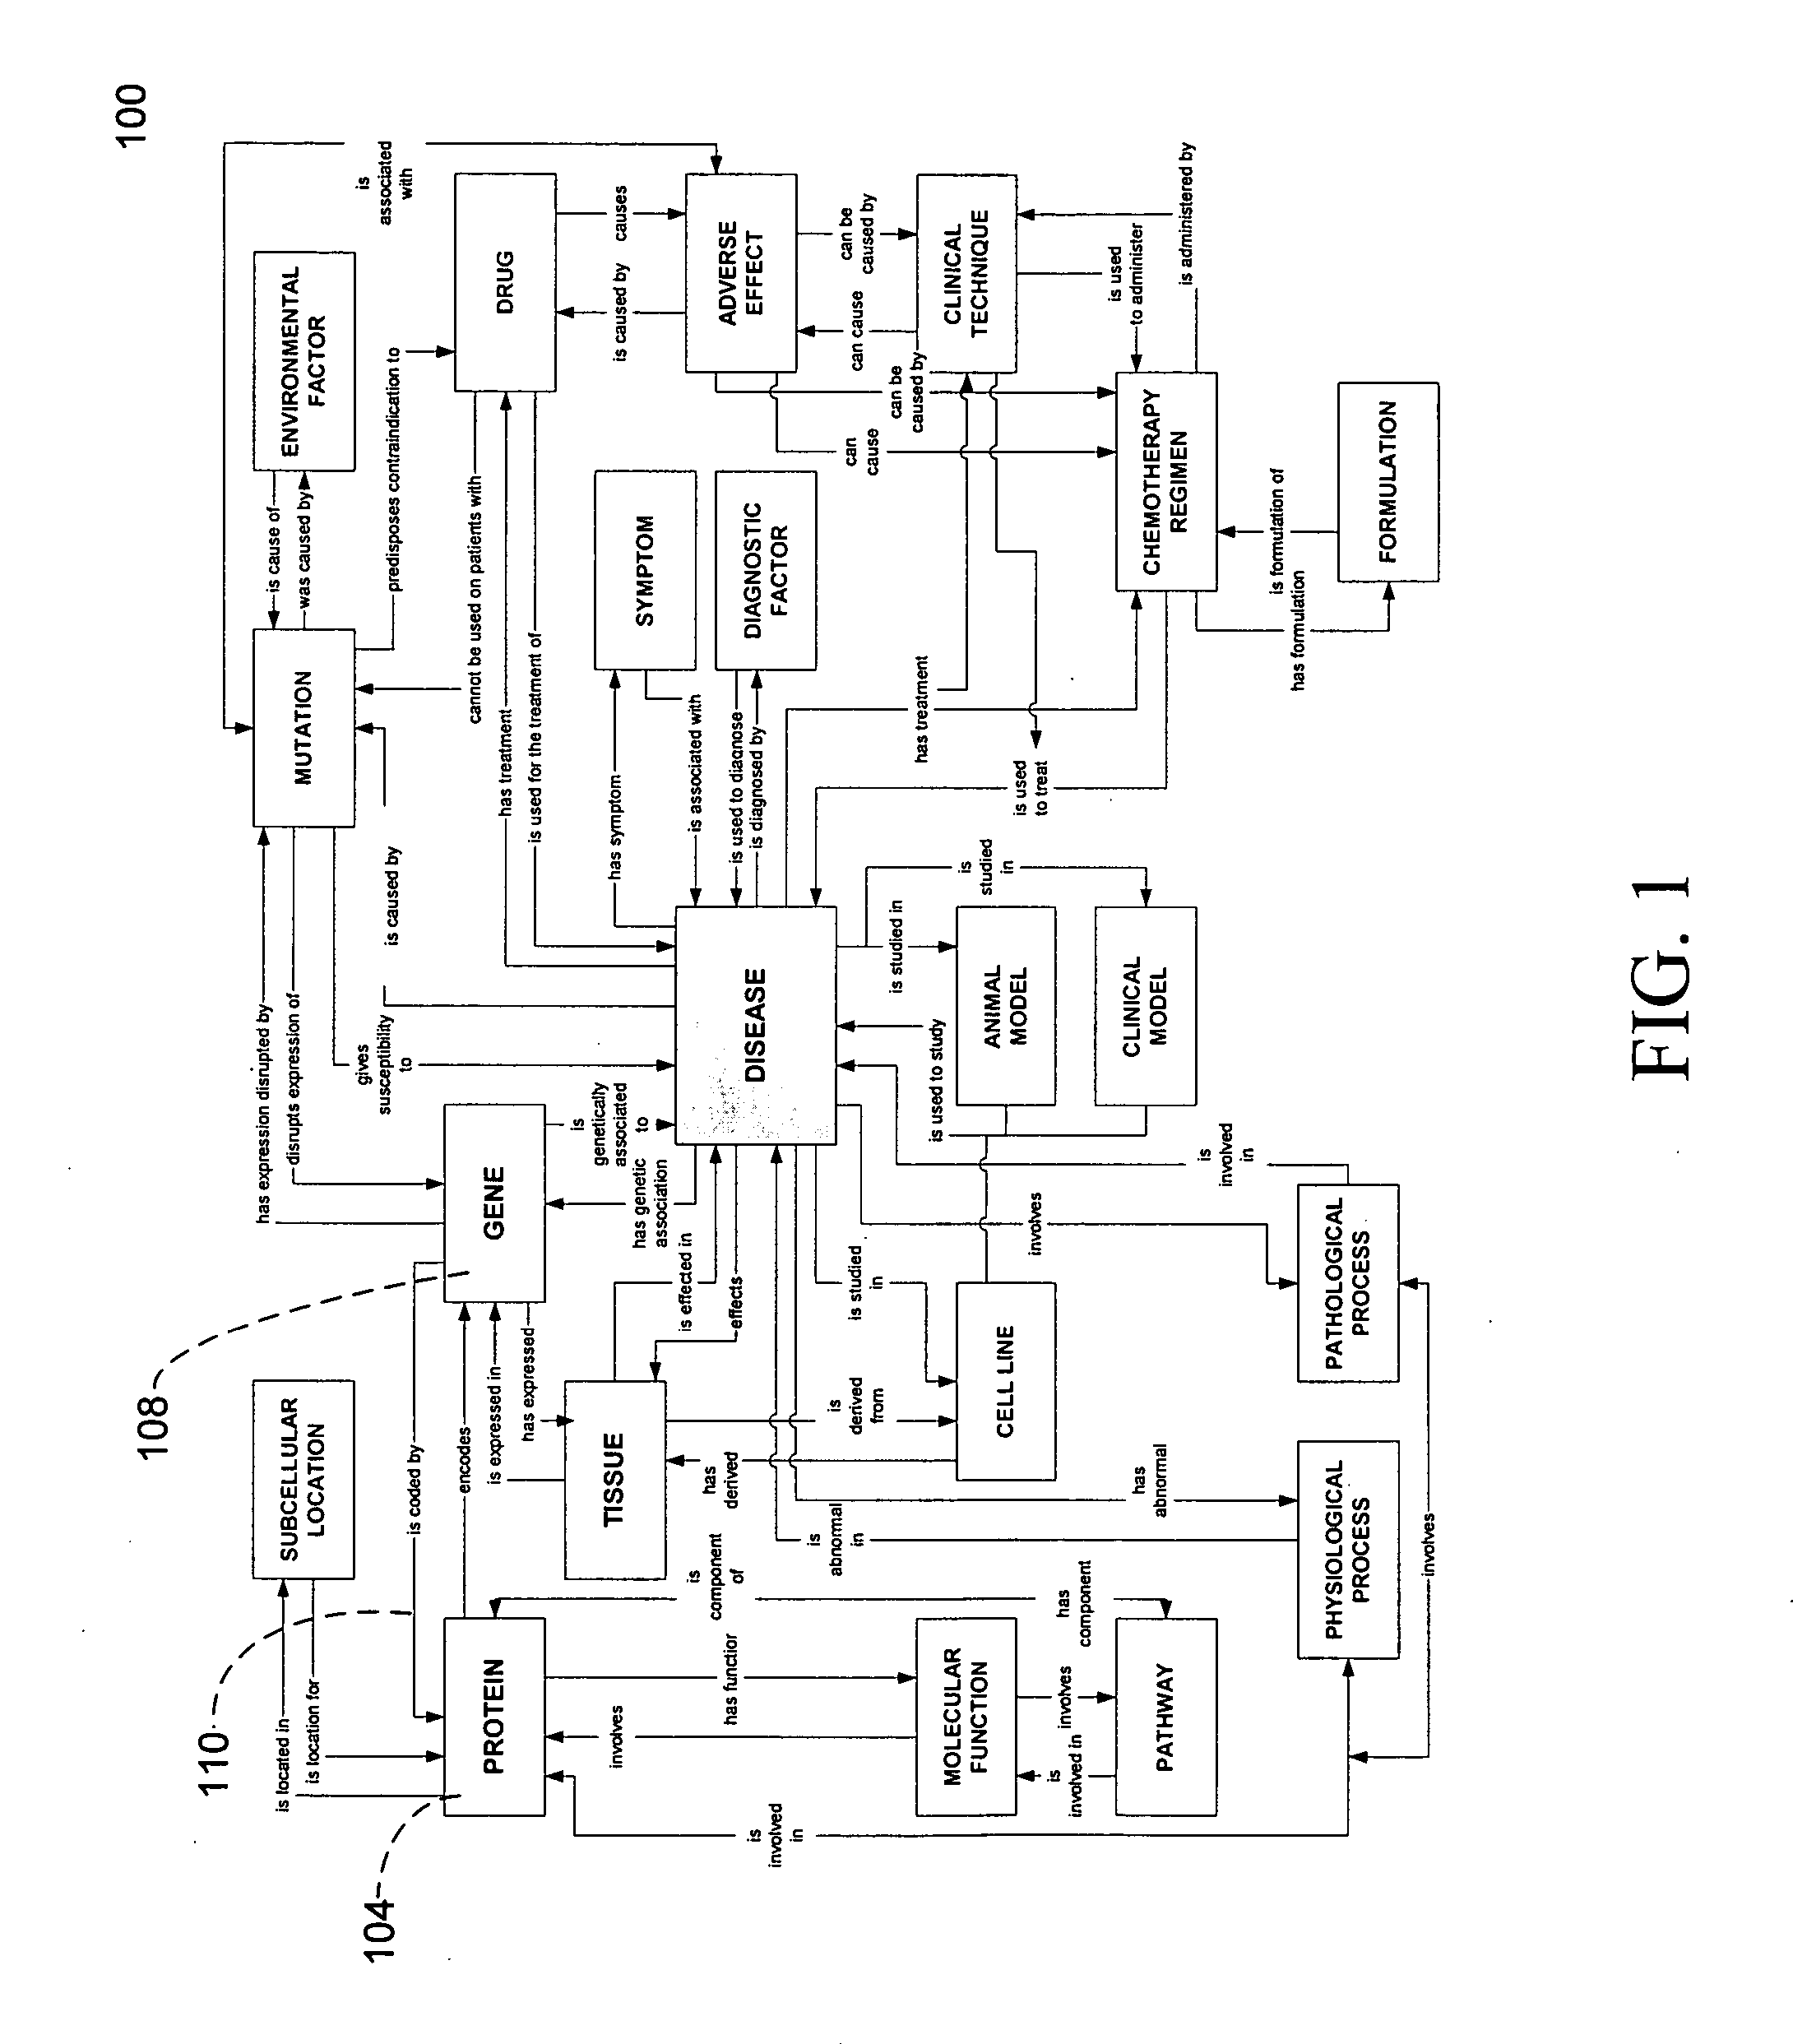 System and method for facilitating user interaction with multi-relational ontologies